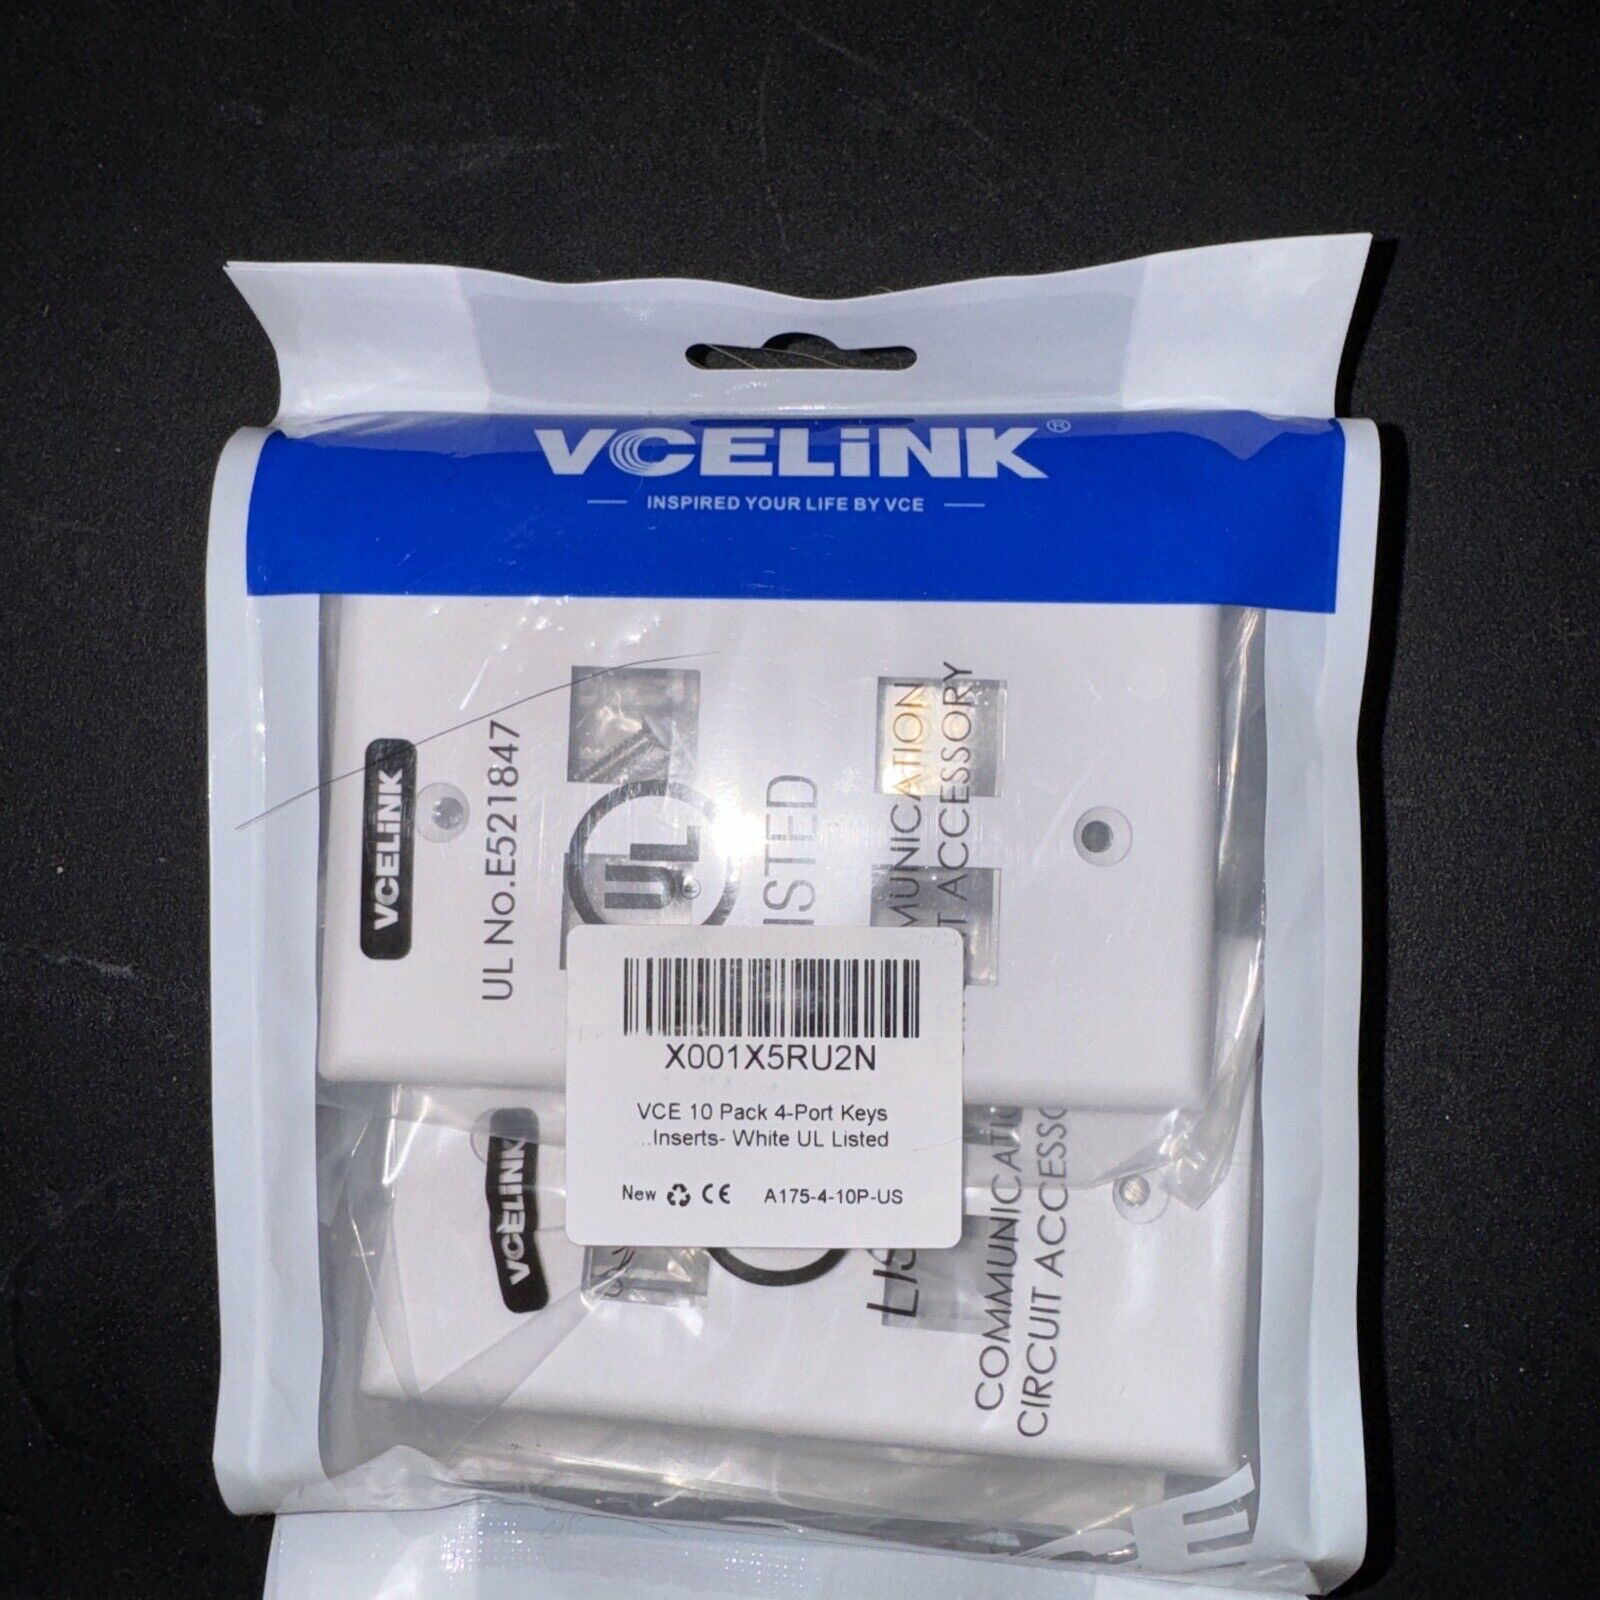 VCELINK 10-pack  4-port Keys -Plate and Patch Panel - White NIP